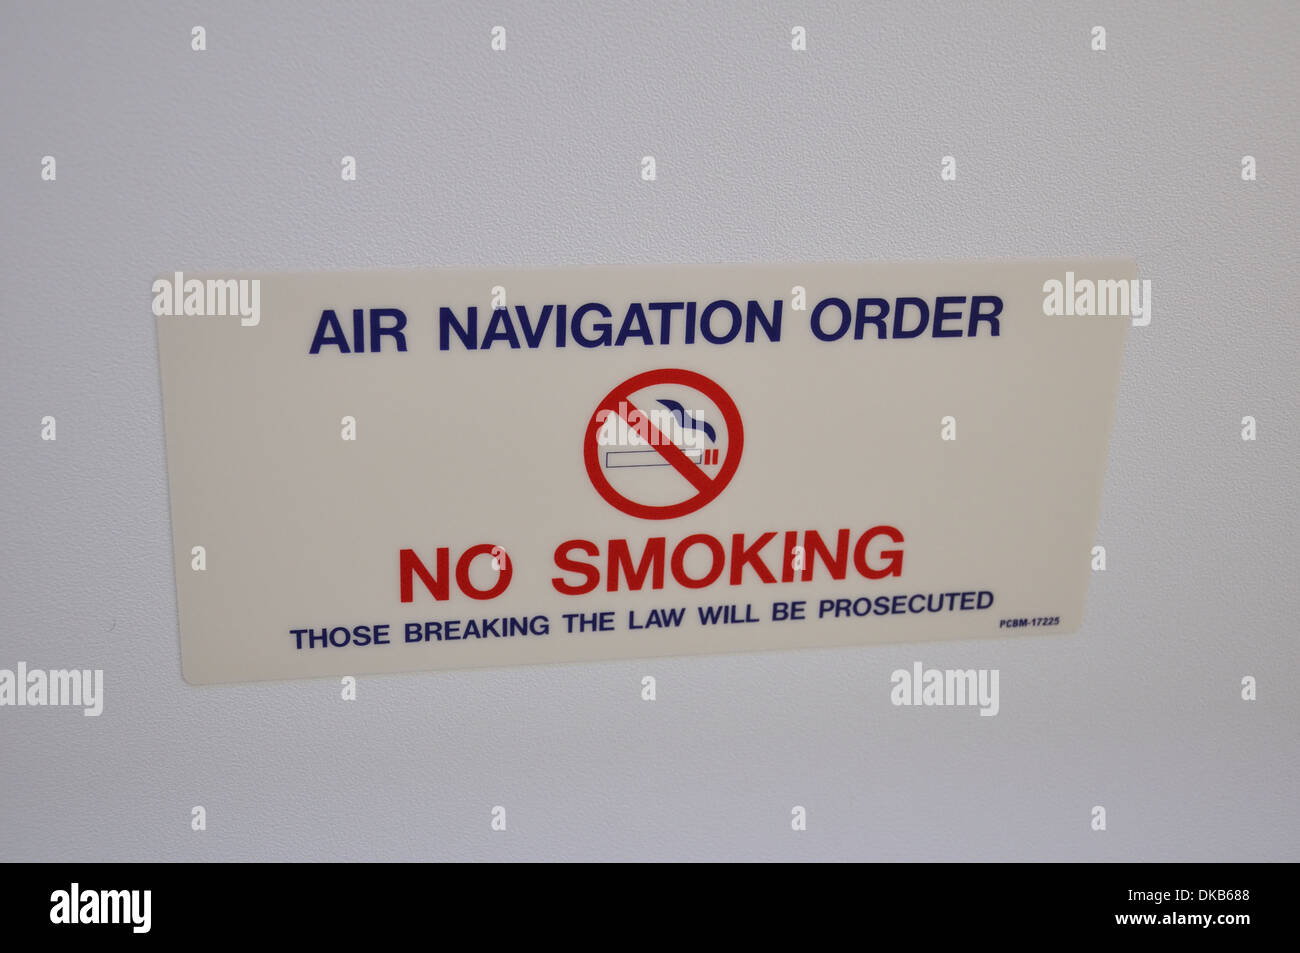 No Smoking sign onboard an airplane Stock Photo